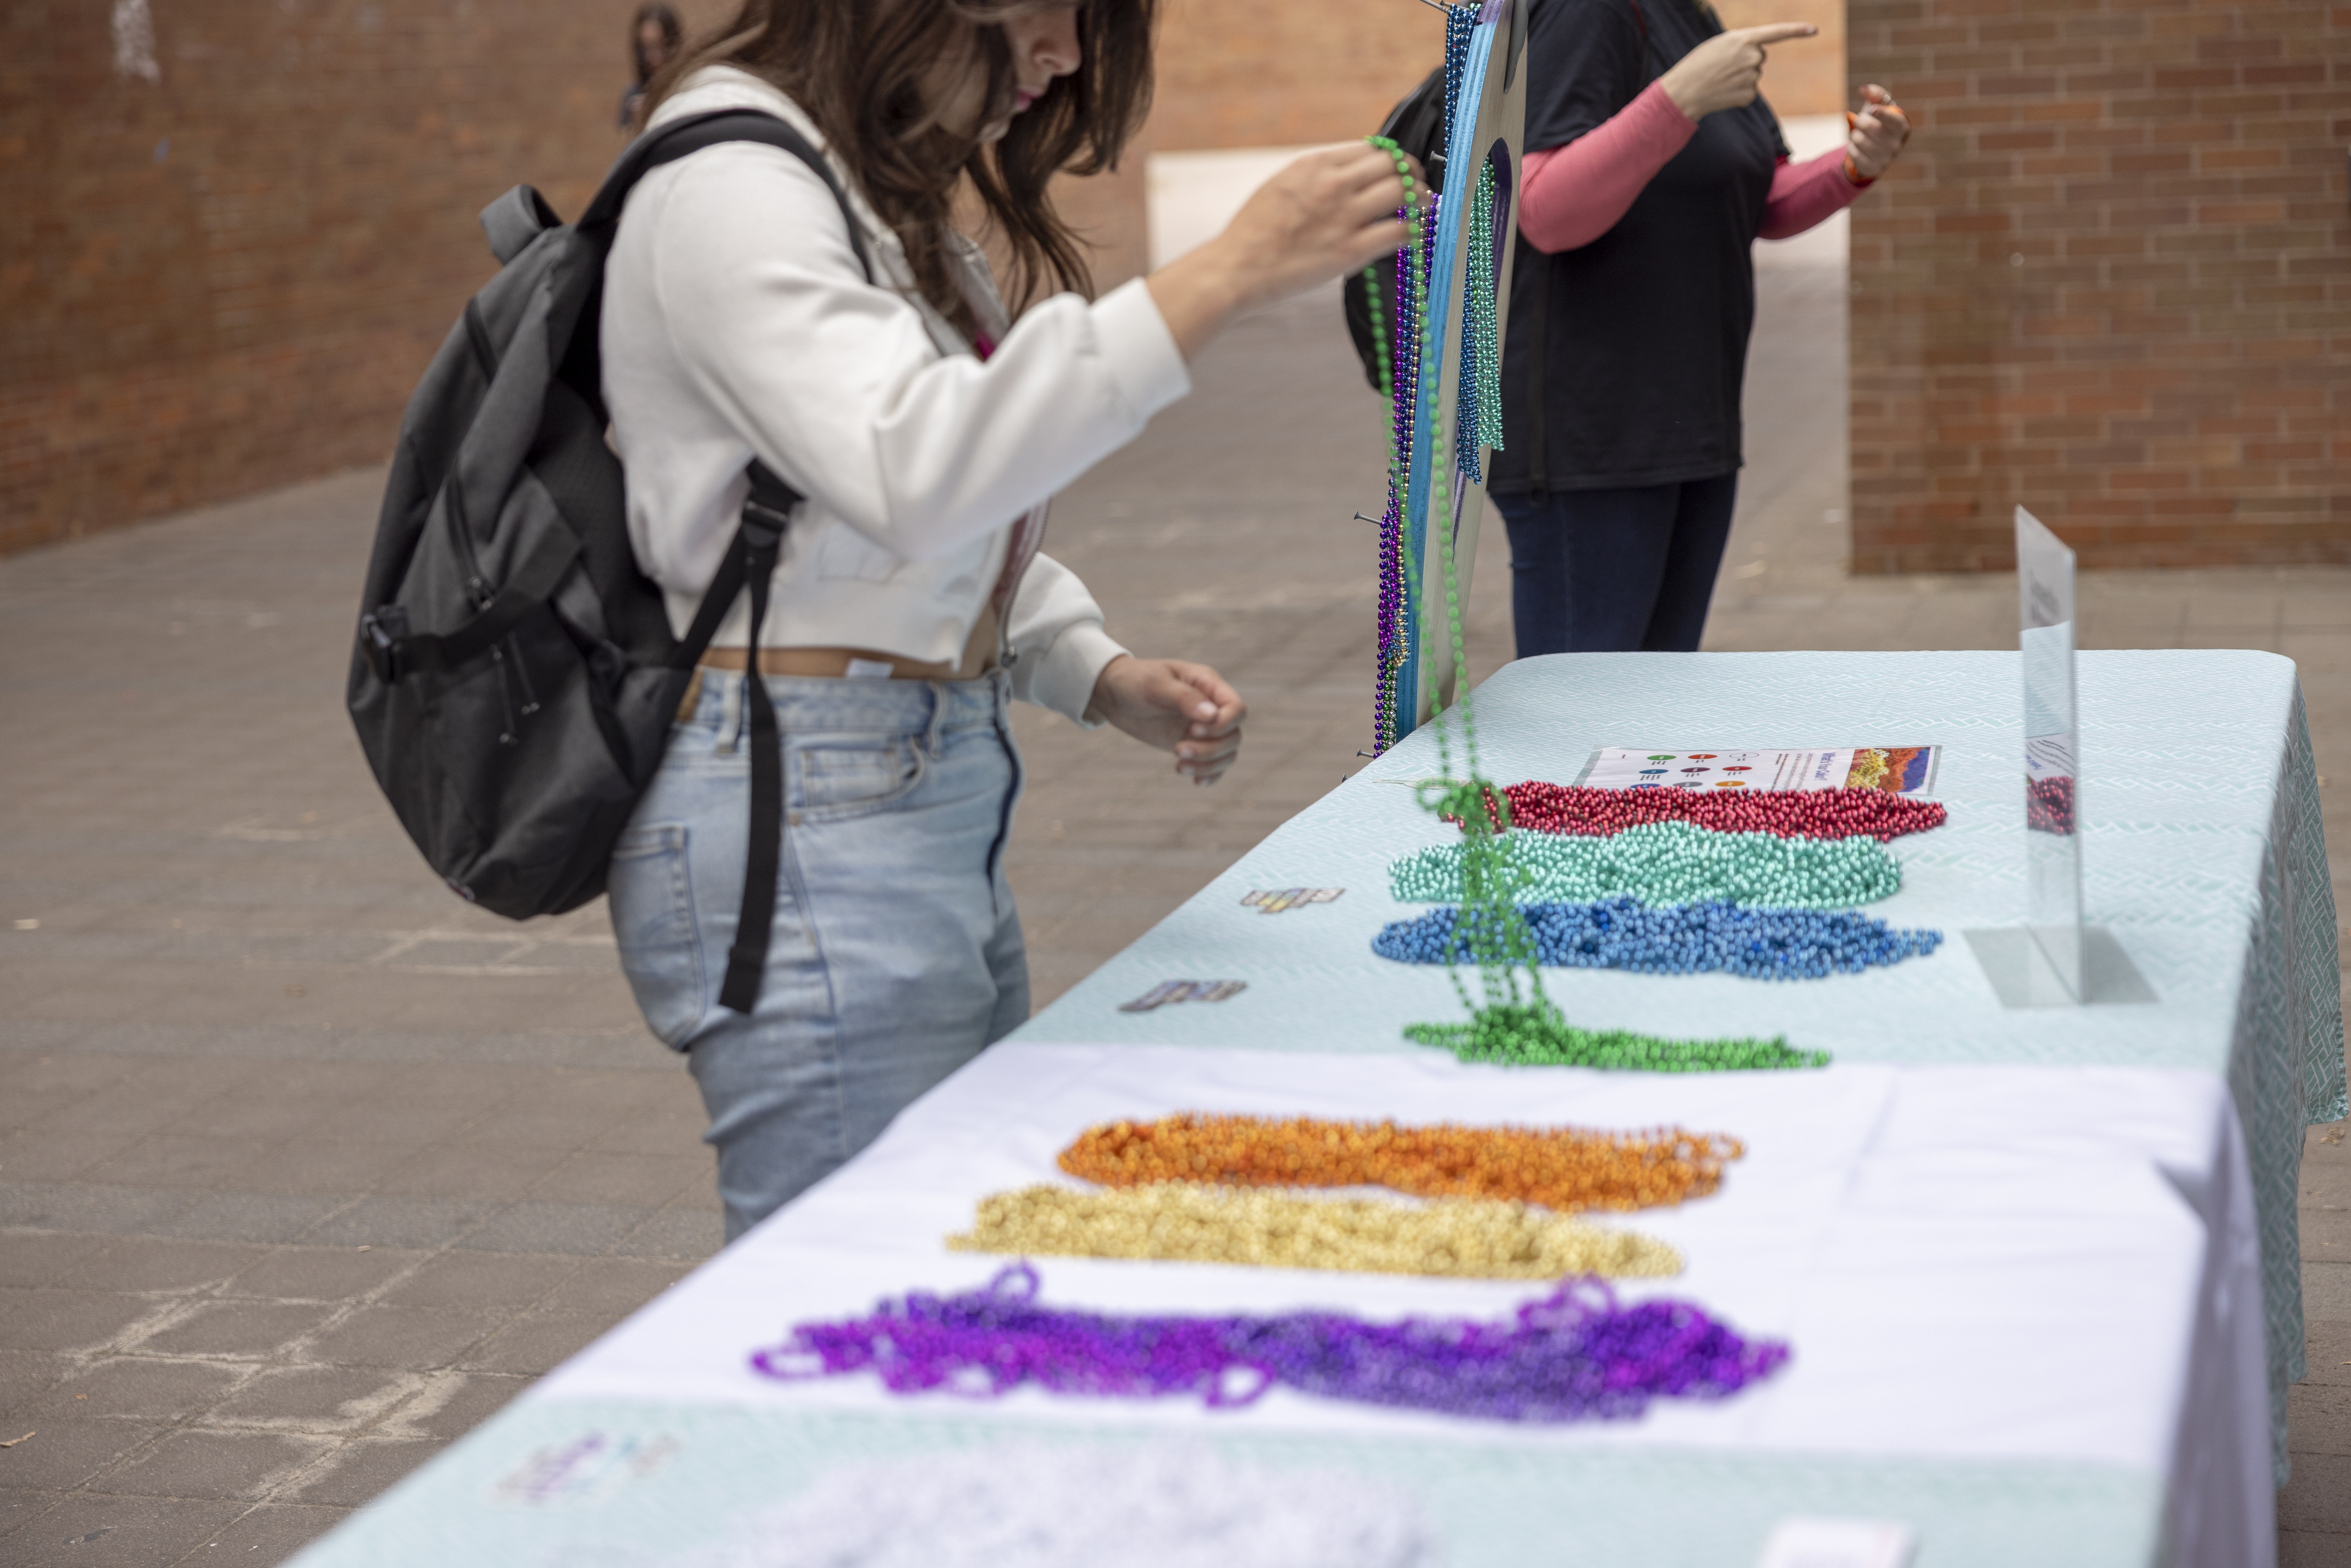 Student with at an NSPW table picking up honor colorful honor beads